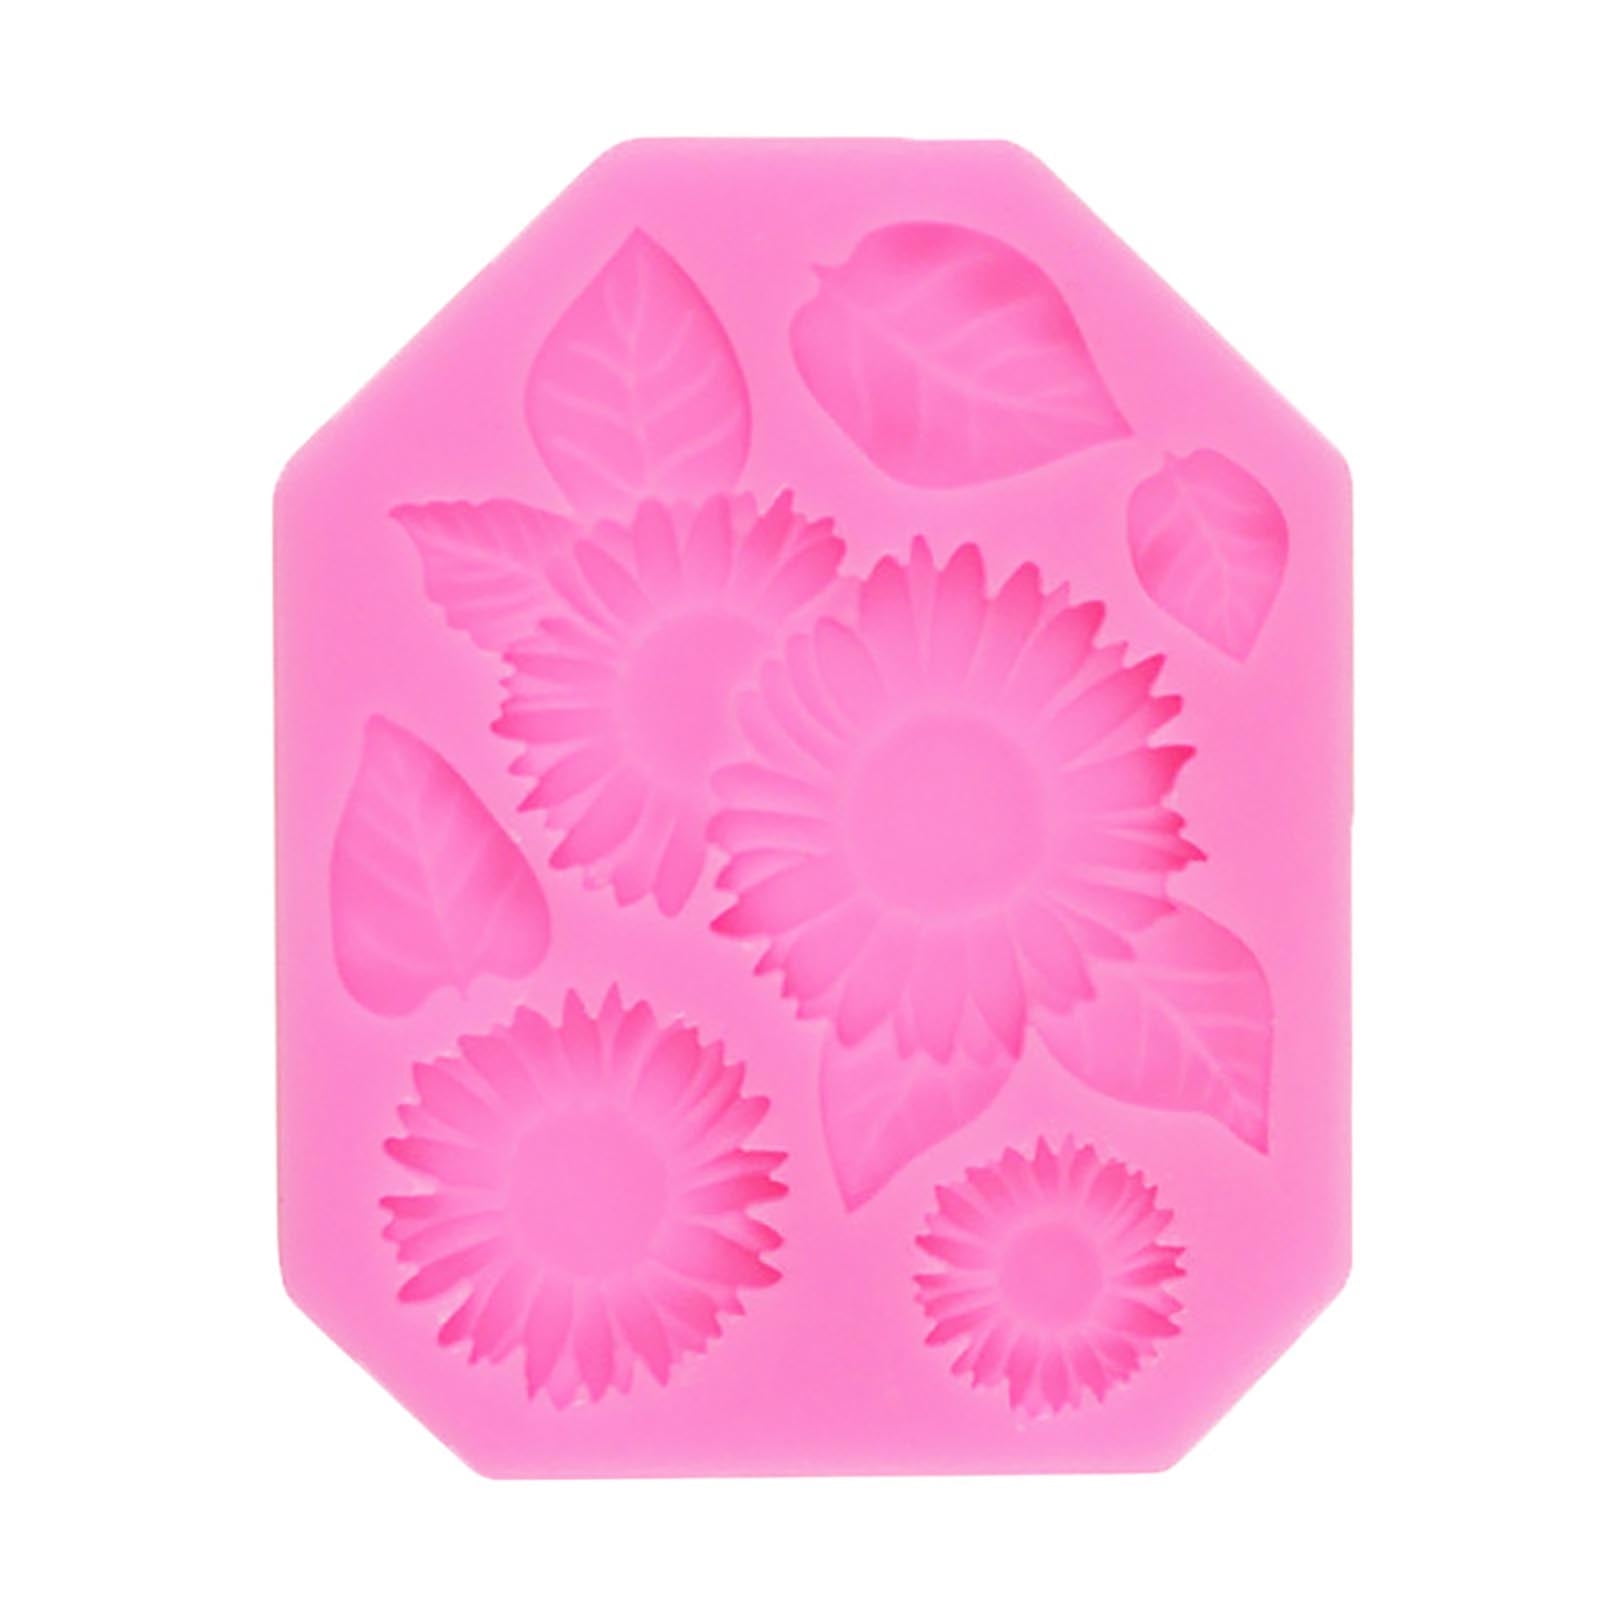 3D Sunflower Silicone Mold Fondant Chocolate Sugar Craft Cake  Mould Baking Tool 